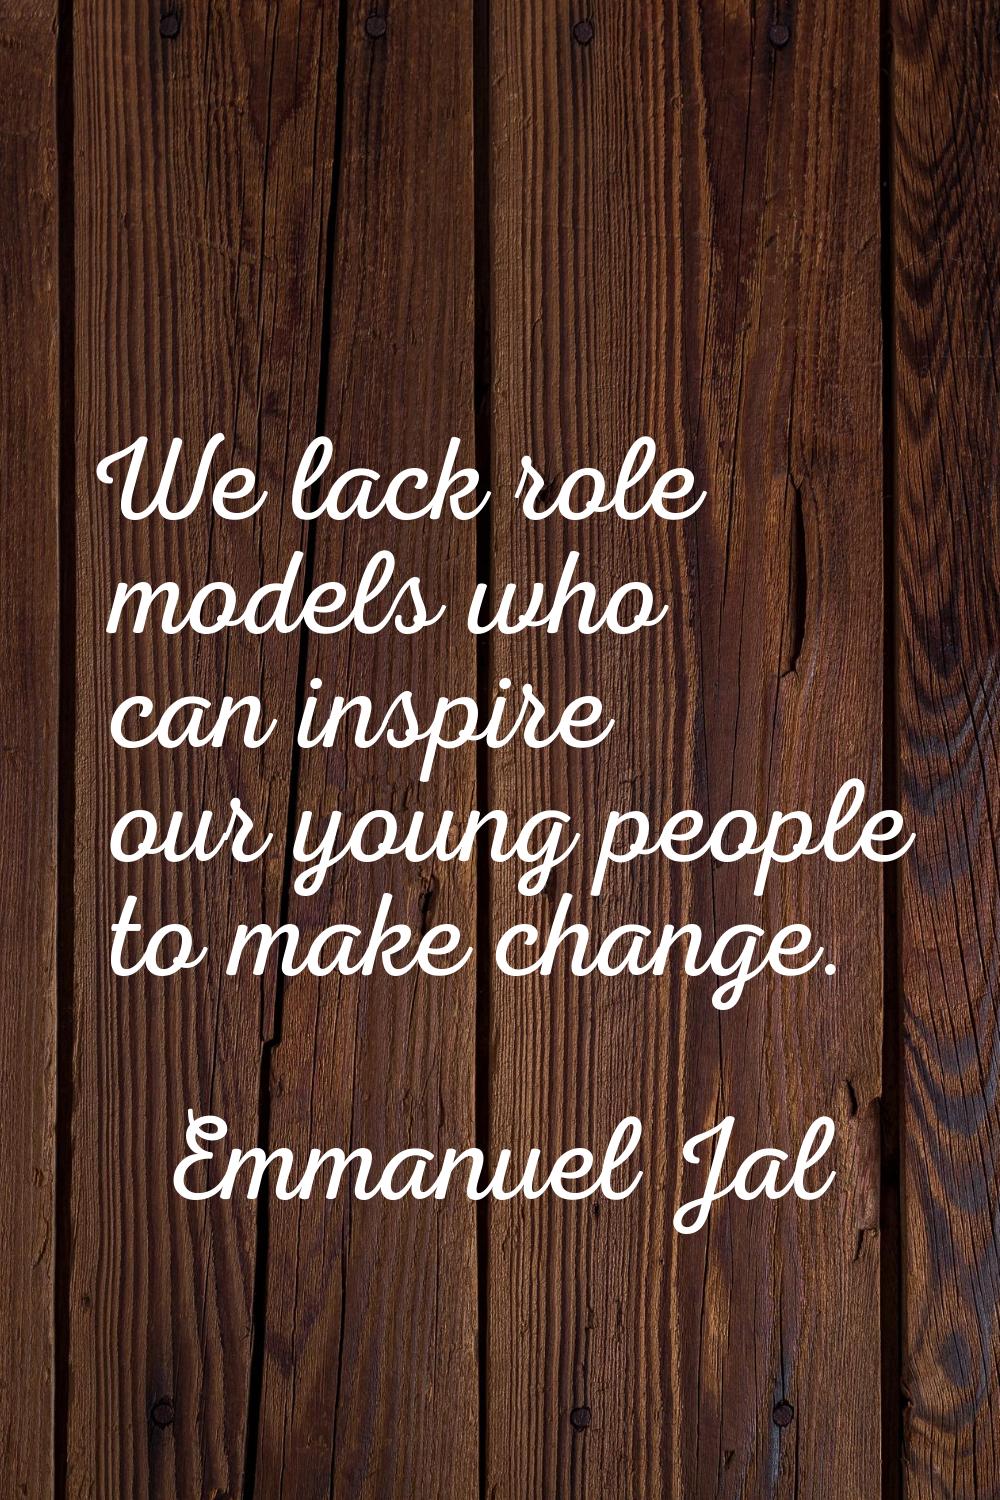 We lack role models who can inspire our young people to make change.